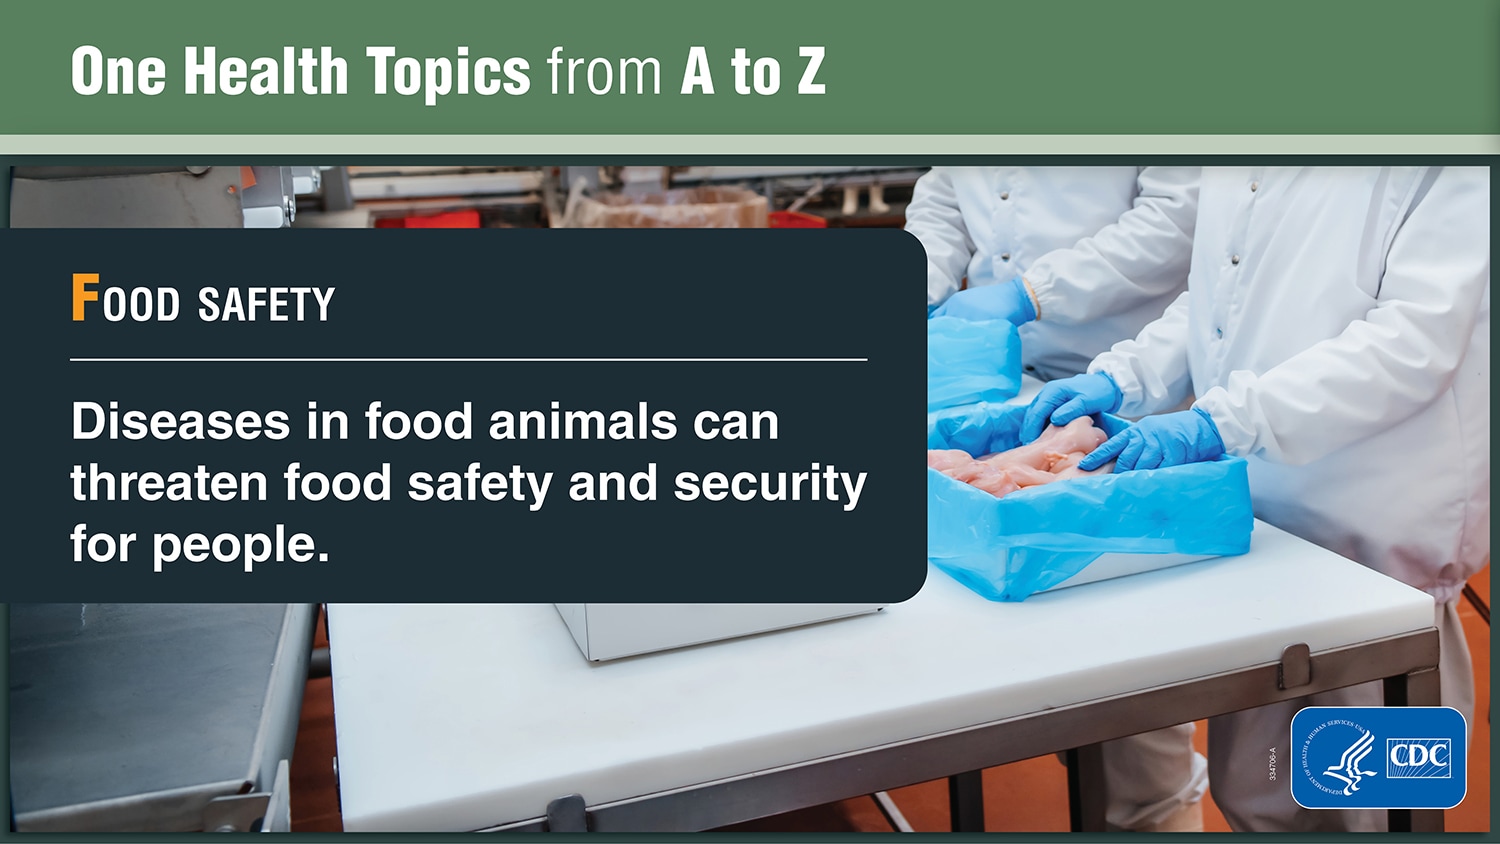 One Health Topics from A to Z explaining Food Safety